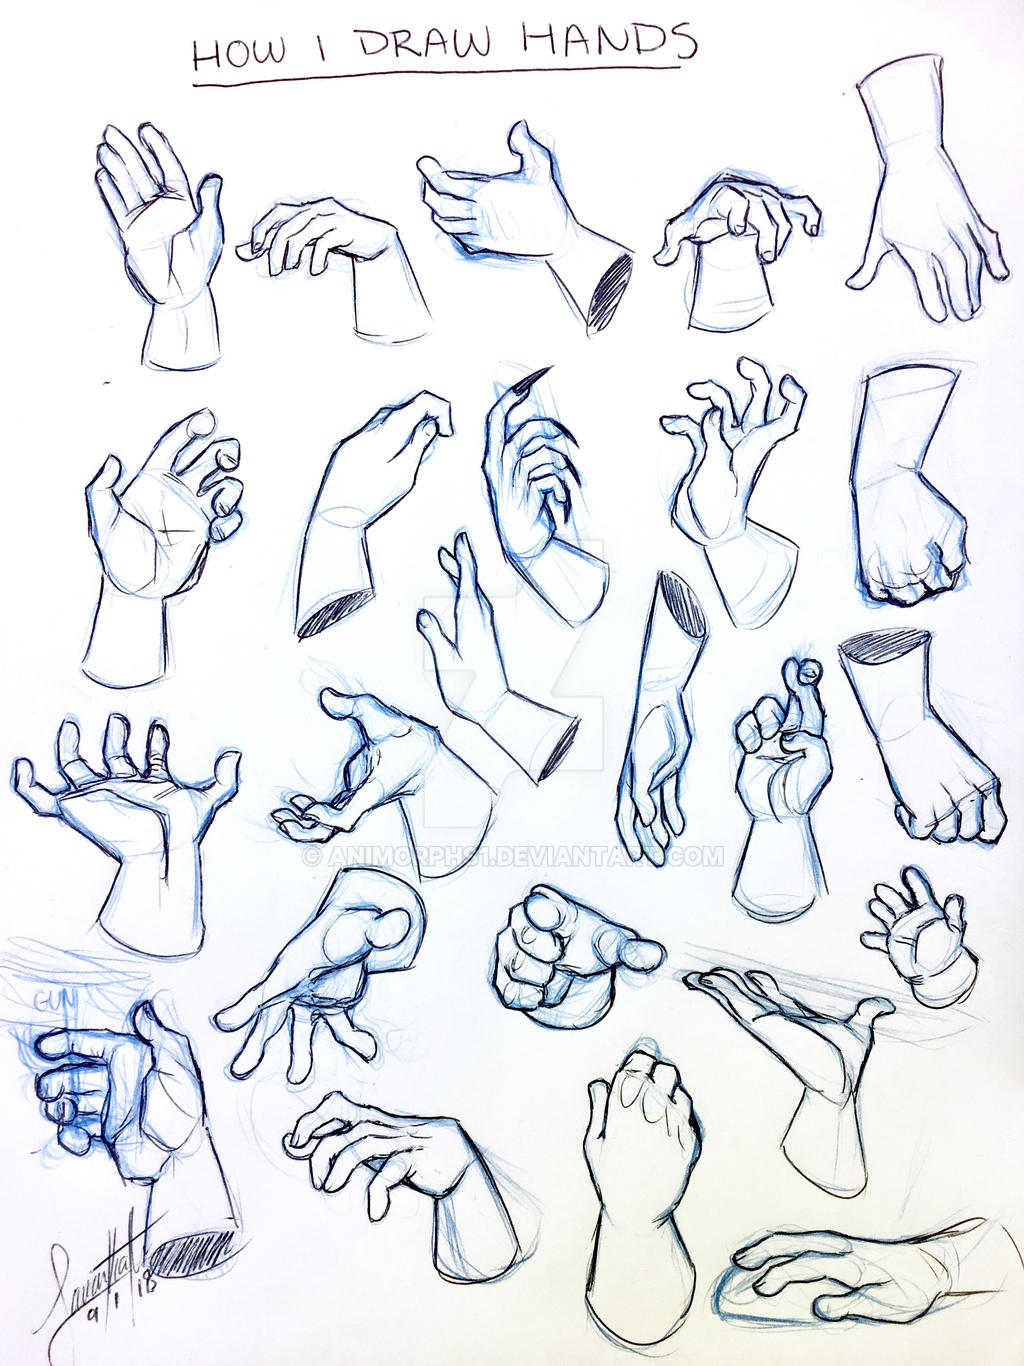 How I Draw Hands by Animorphs1 on DeviantArt